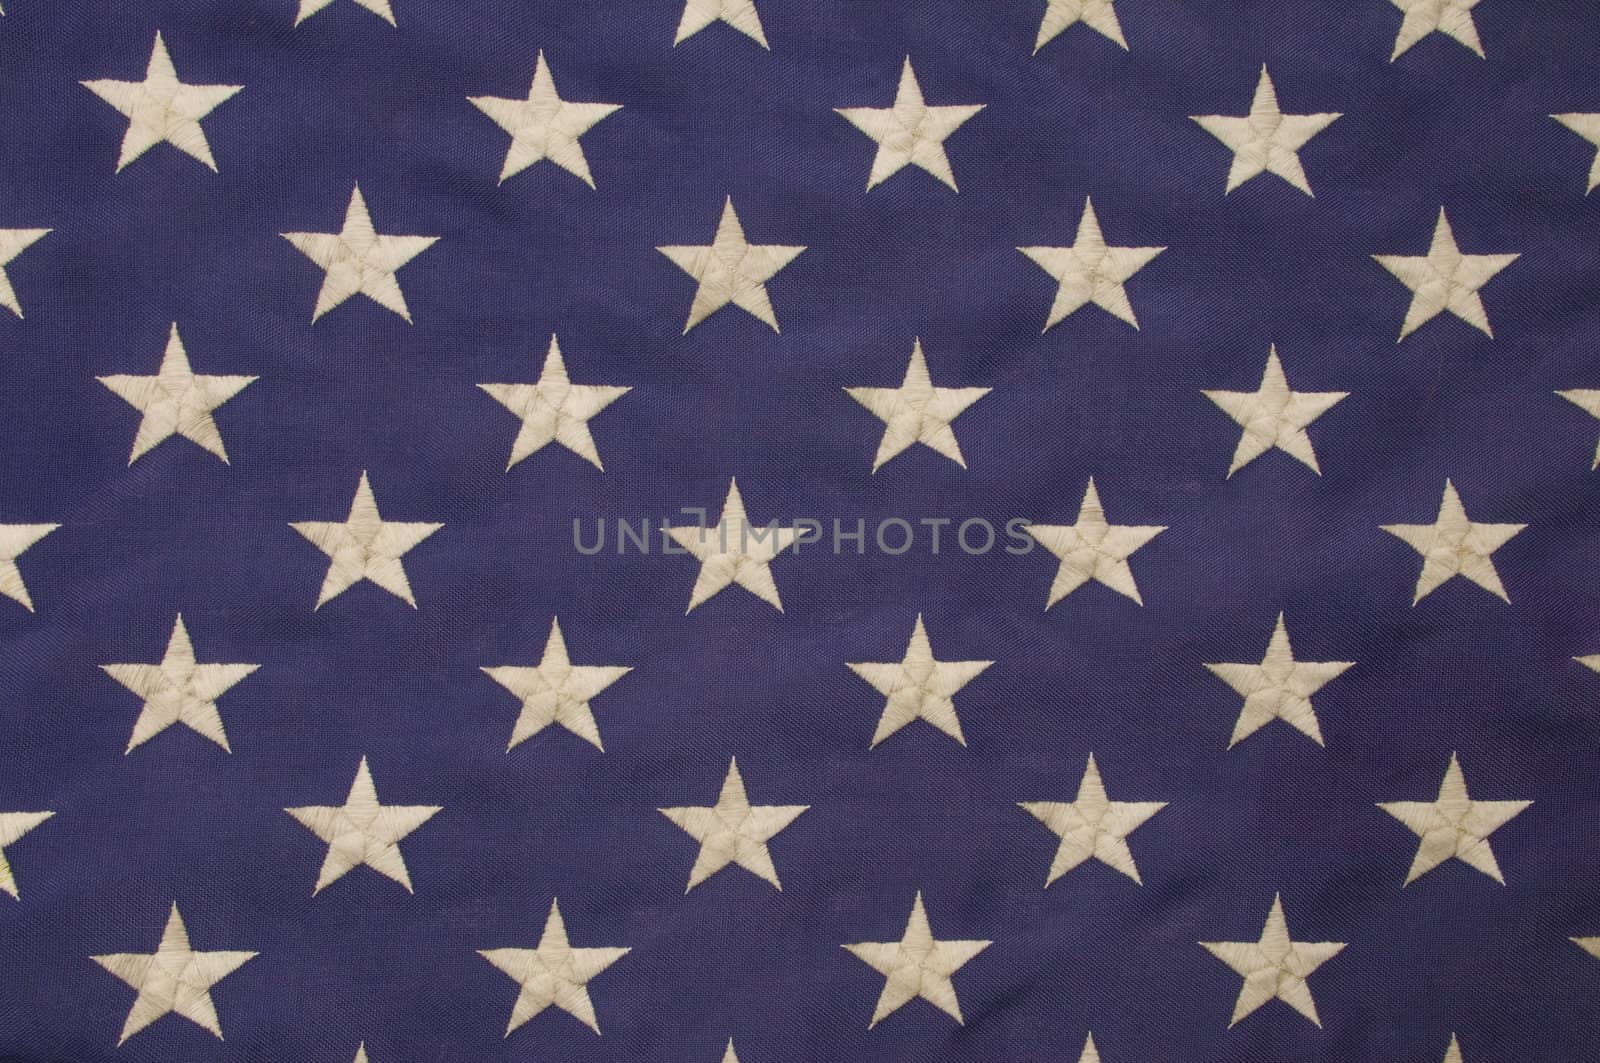 Embroidered white stars on a field of blue which represents the union on the American flag